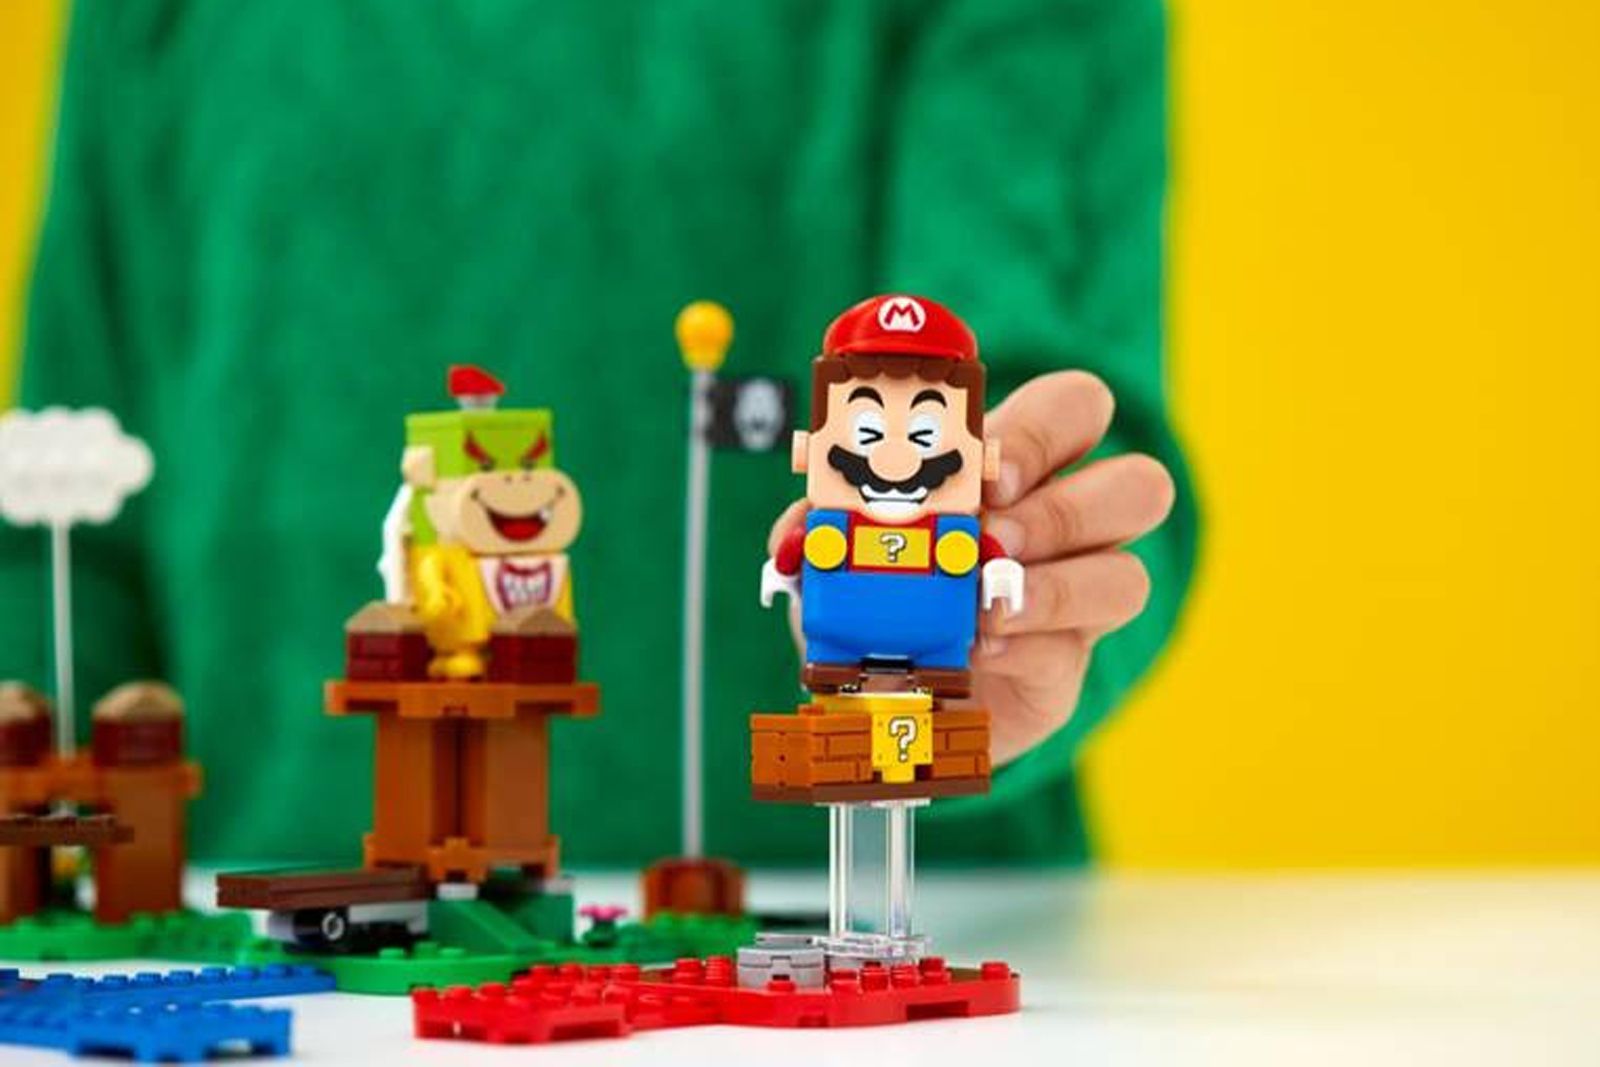 First Super Mario Lego sets detailed - including how Mario interacts with the bricks image 1